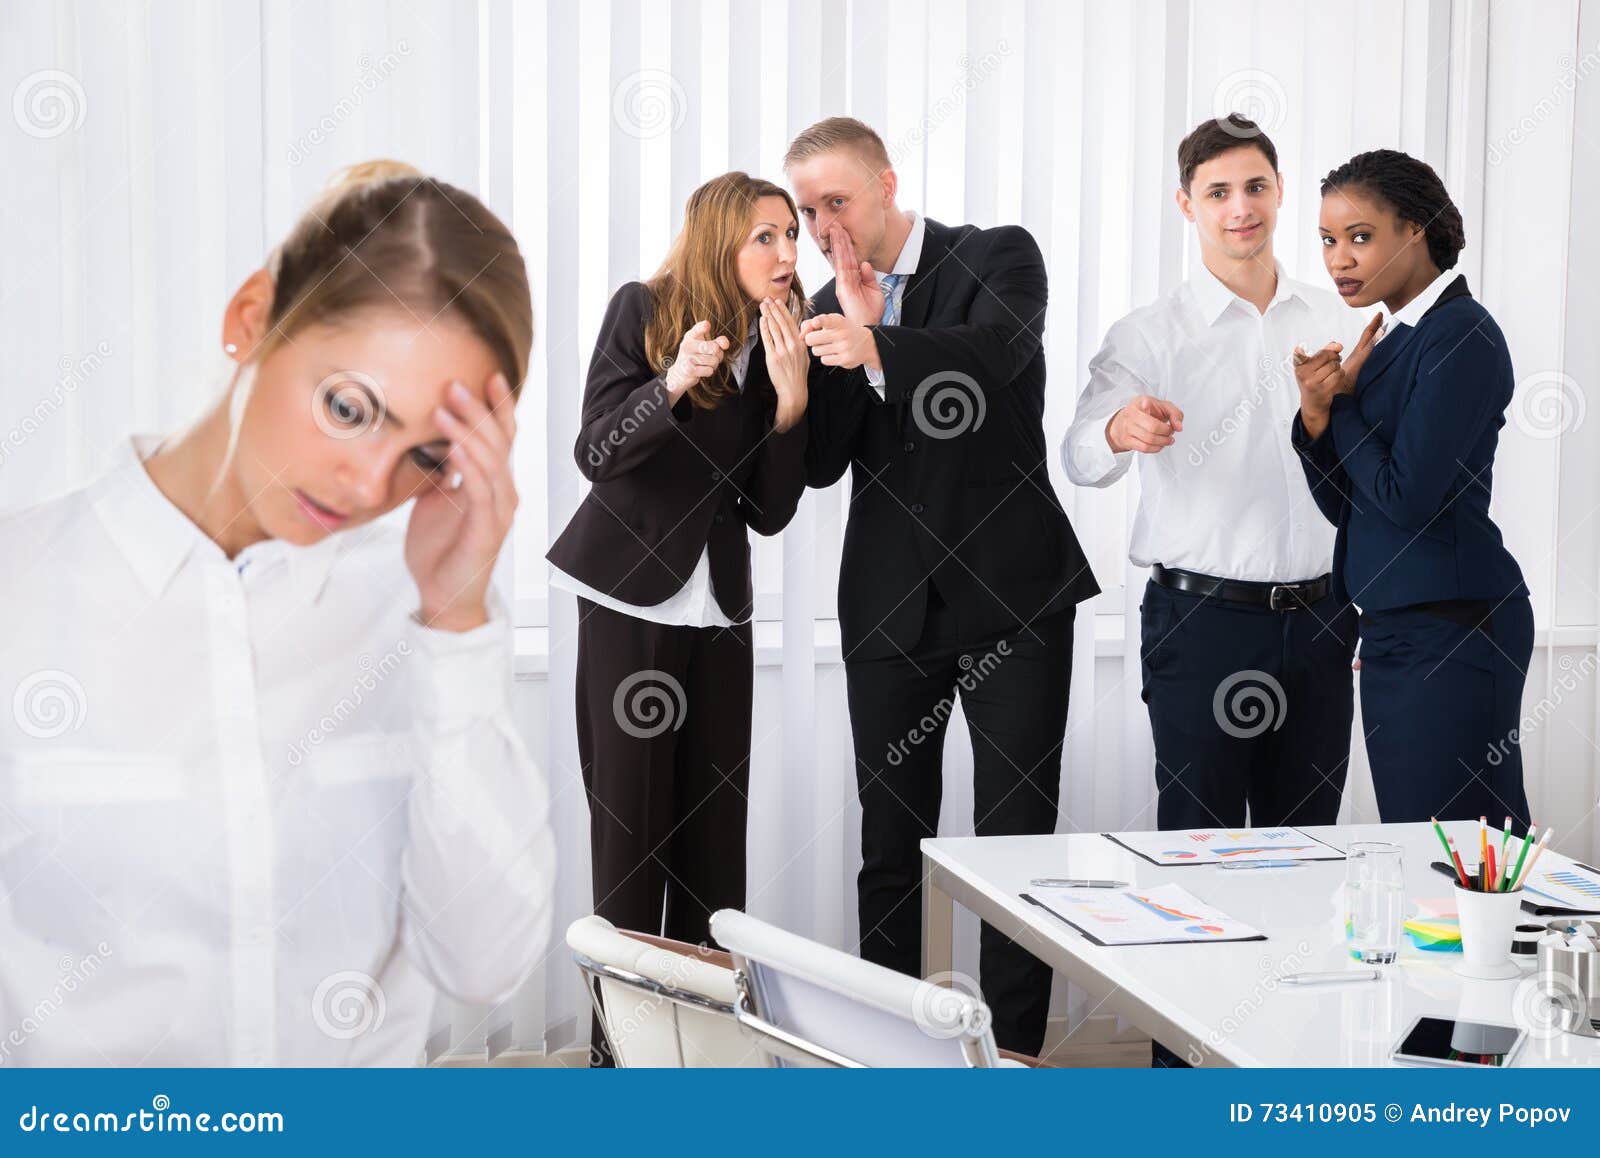 stressed female colleague in office